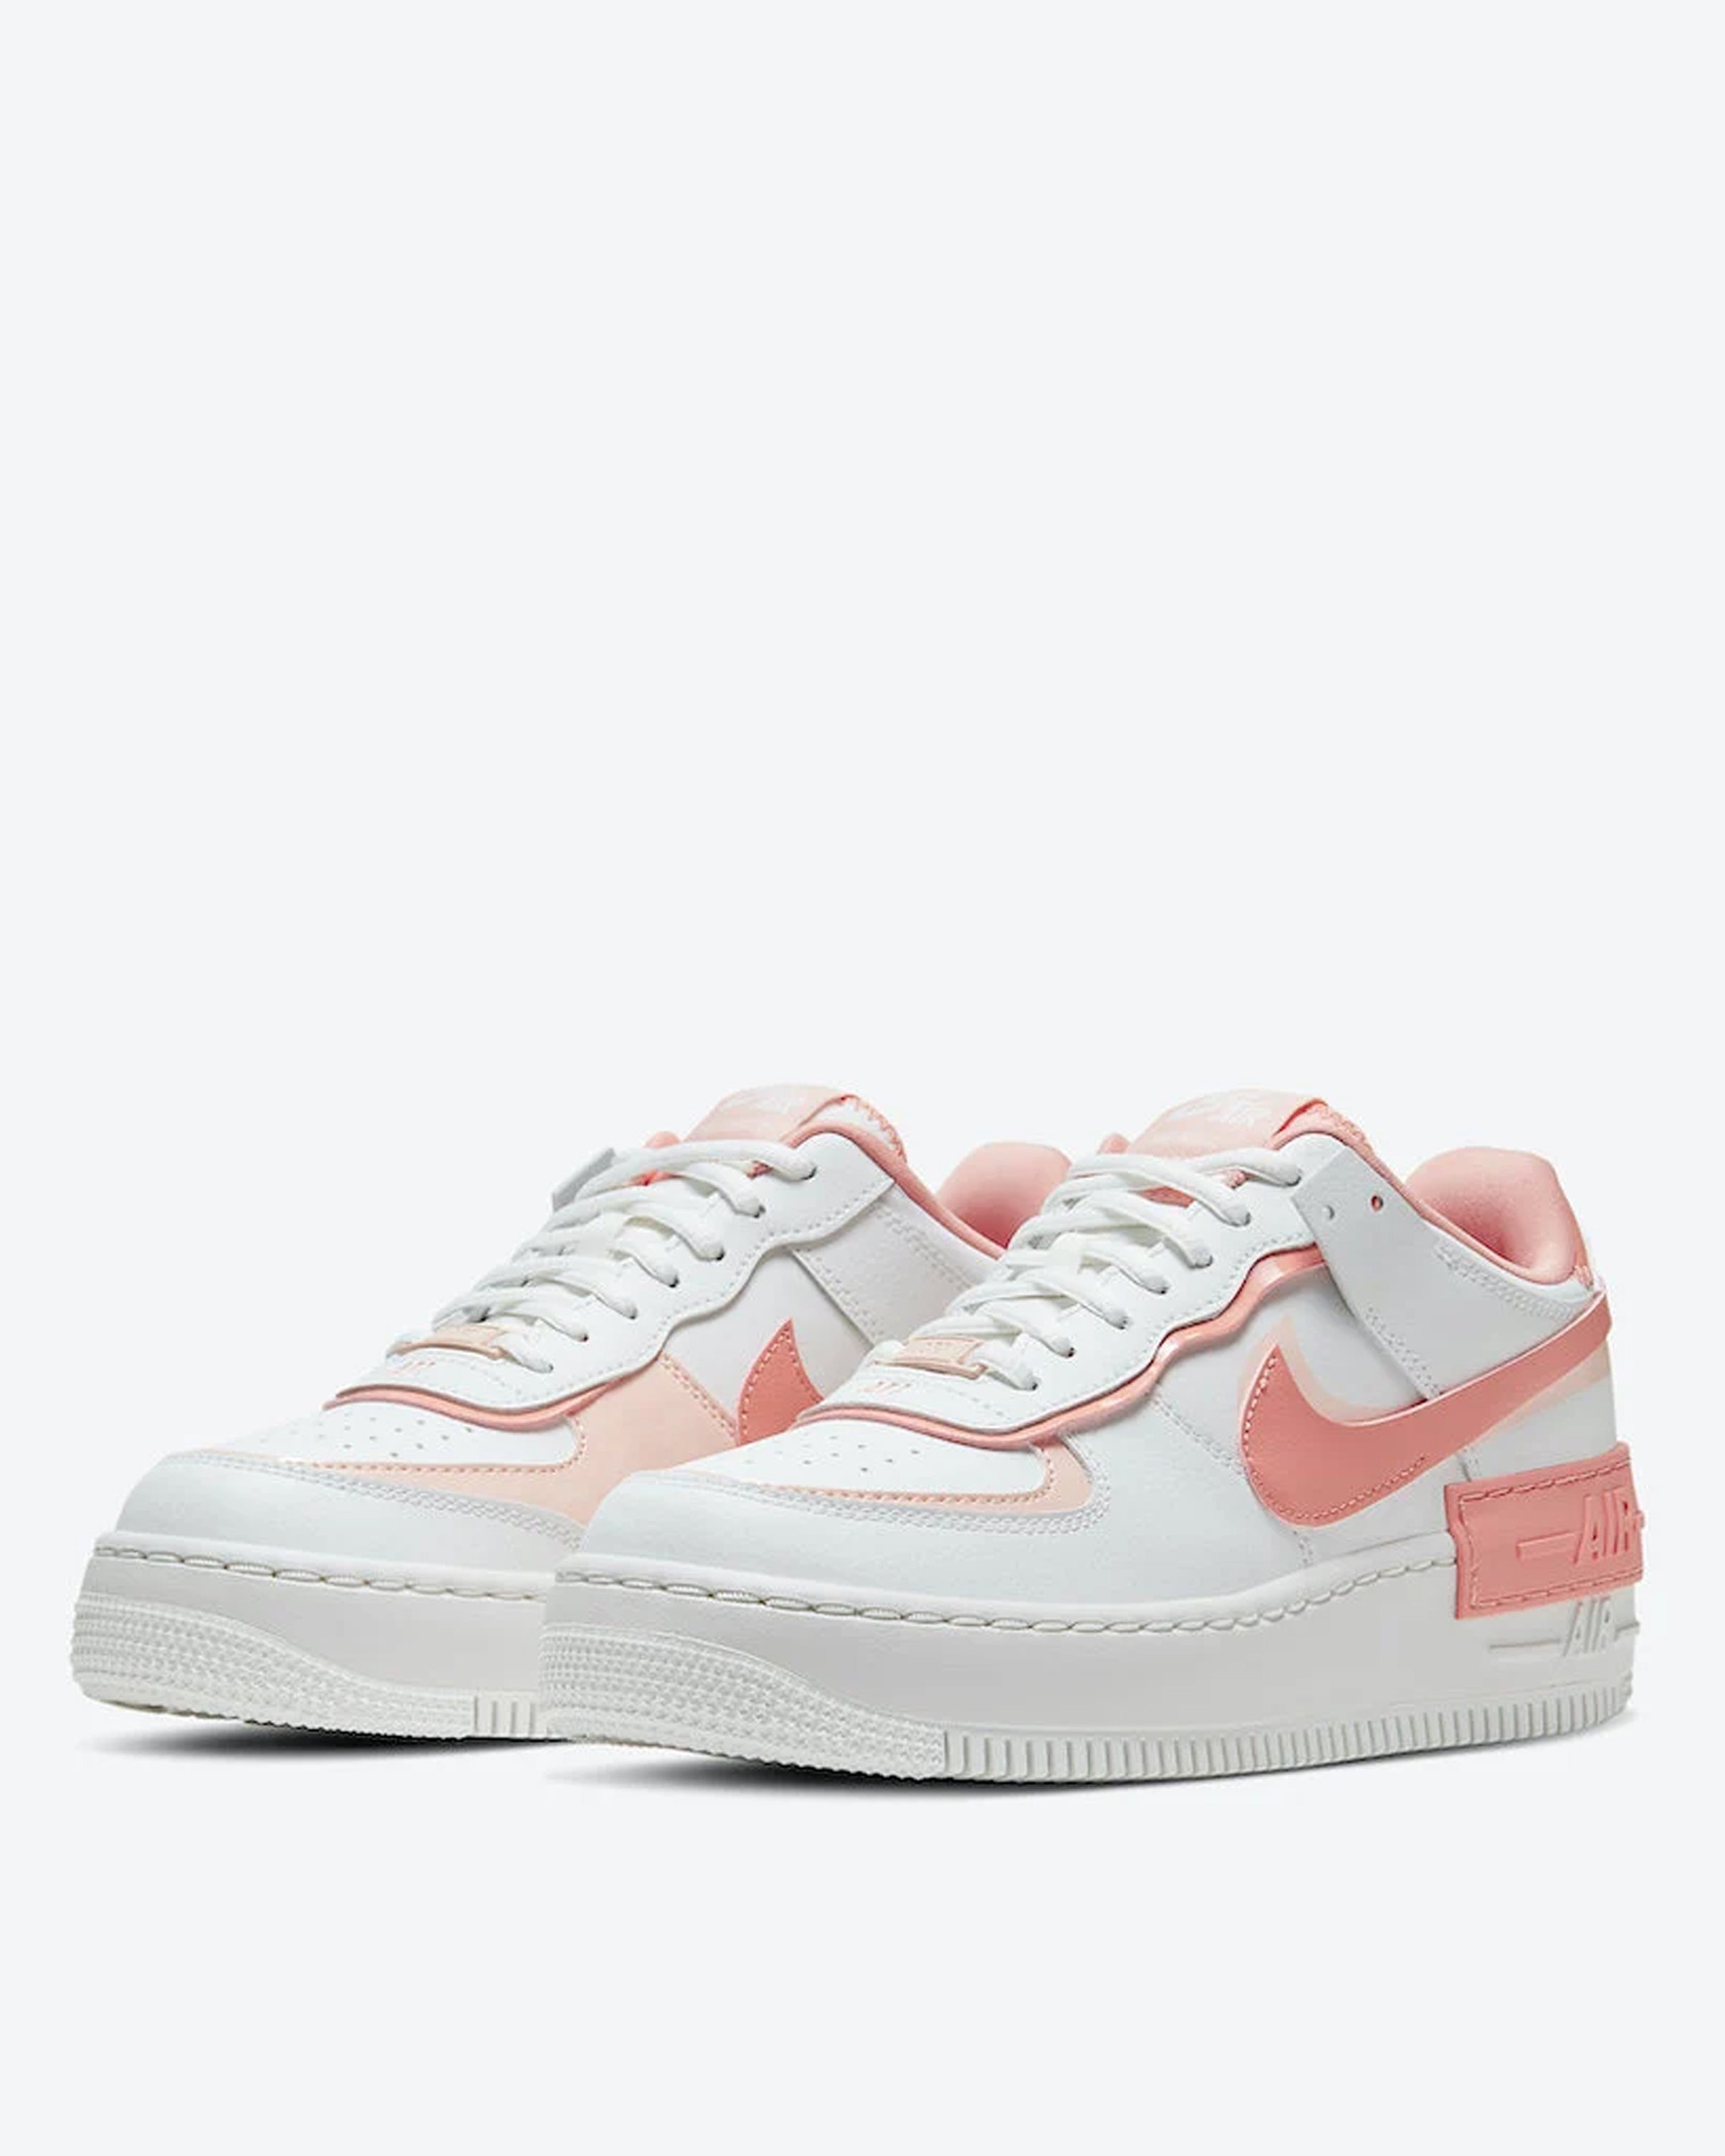 Nike Air Force 1 Shadow in White and Pink